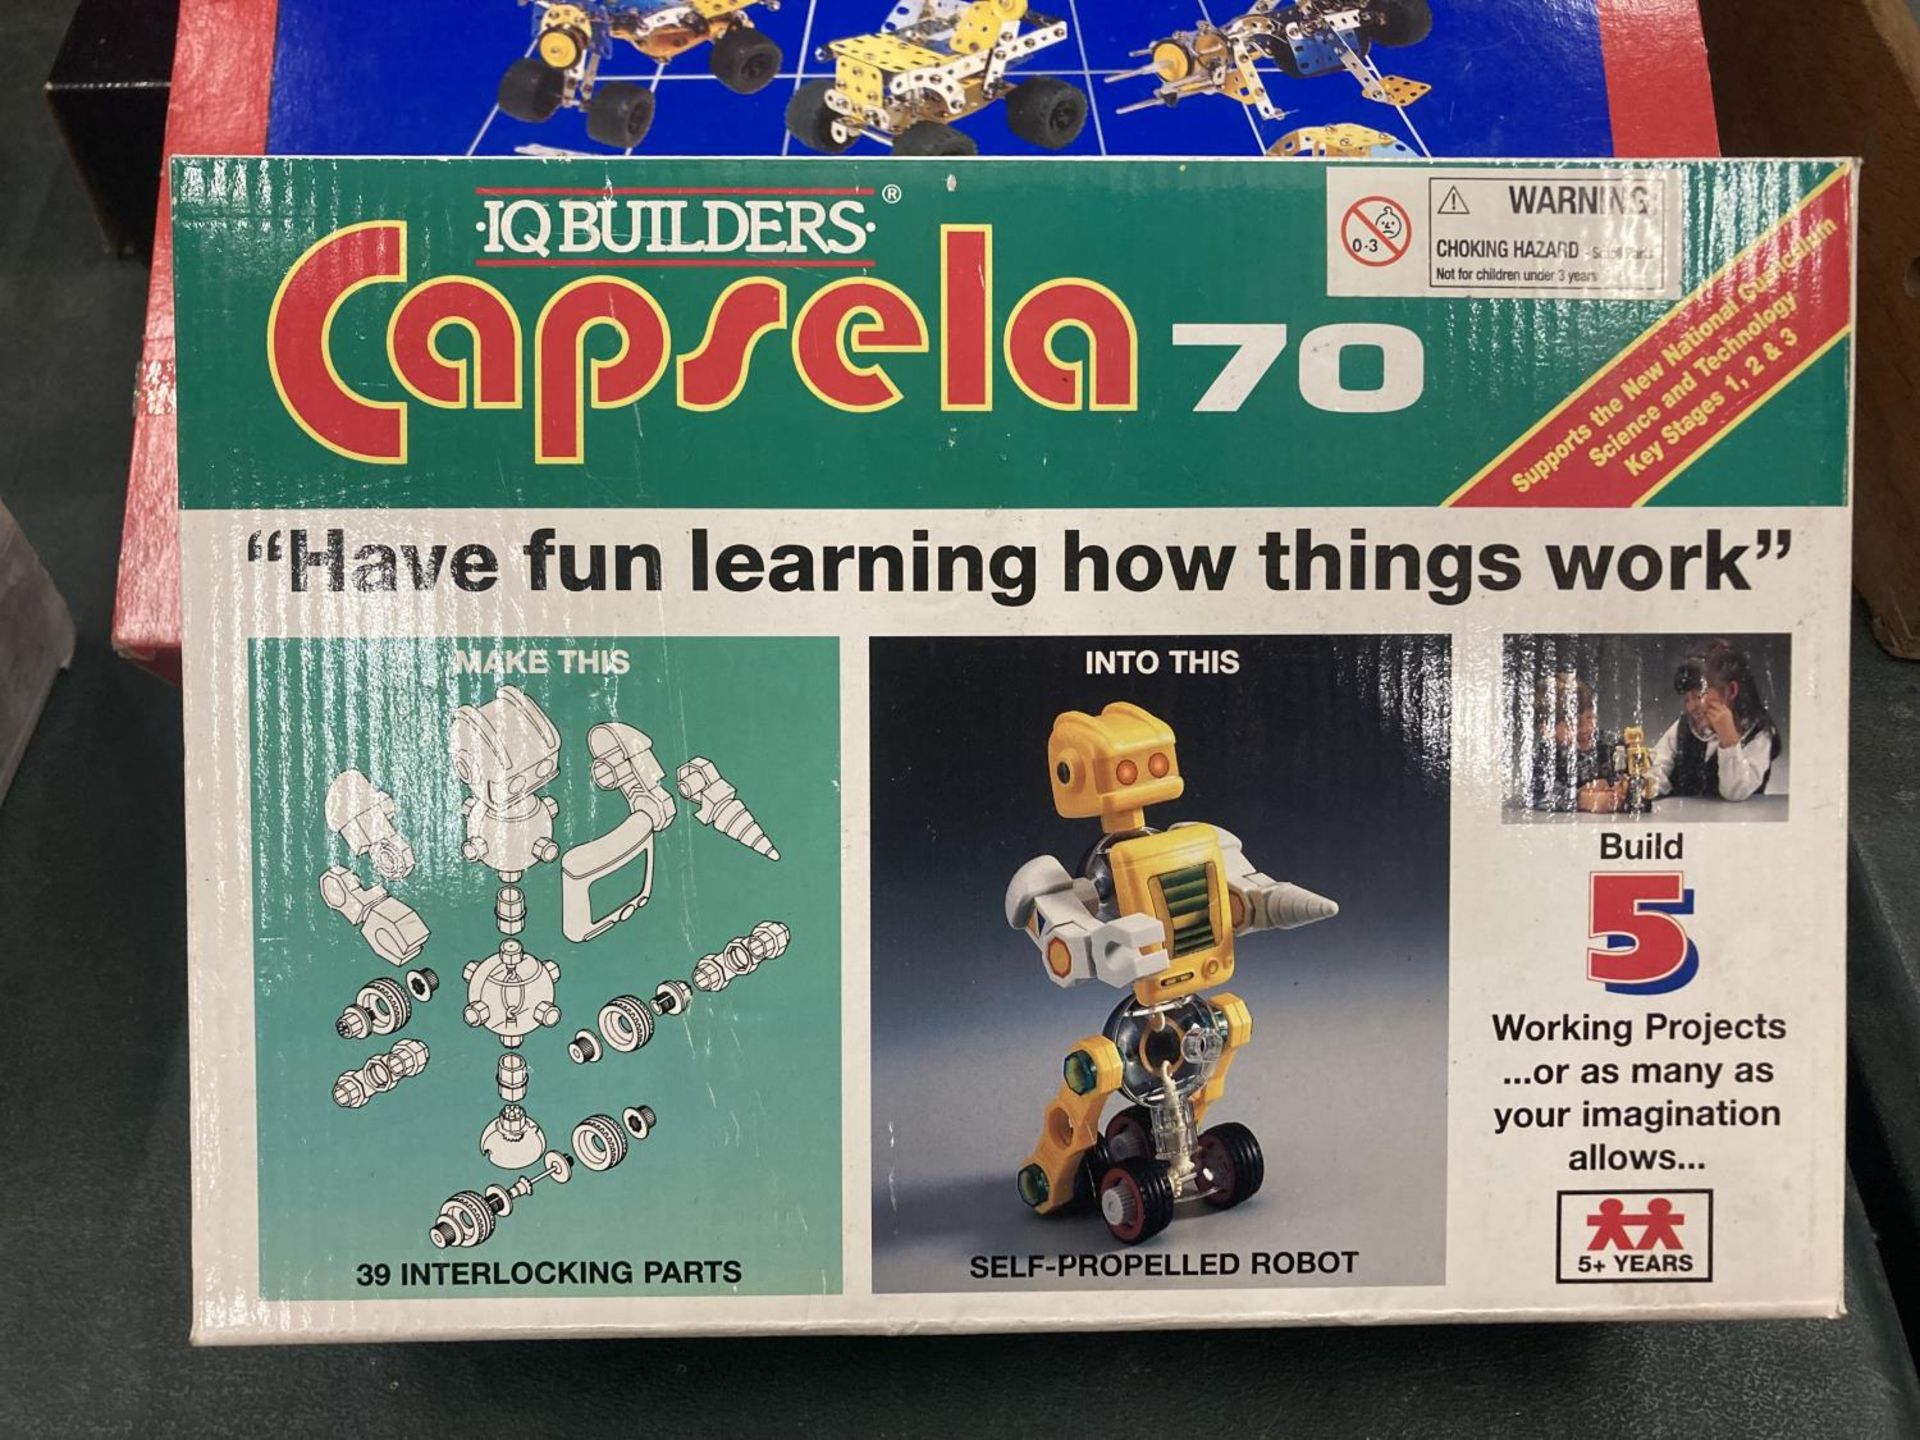 THREE BOXED CHILDREN'S CONSTRUCTION SETS - CAPSELA 70, MECCANO AND DIY METAL CONSTRUCTION MODEL KIT - Image 4 of 4